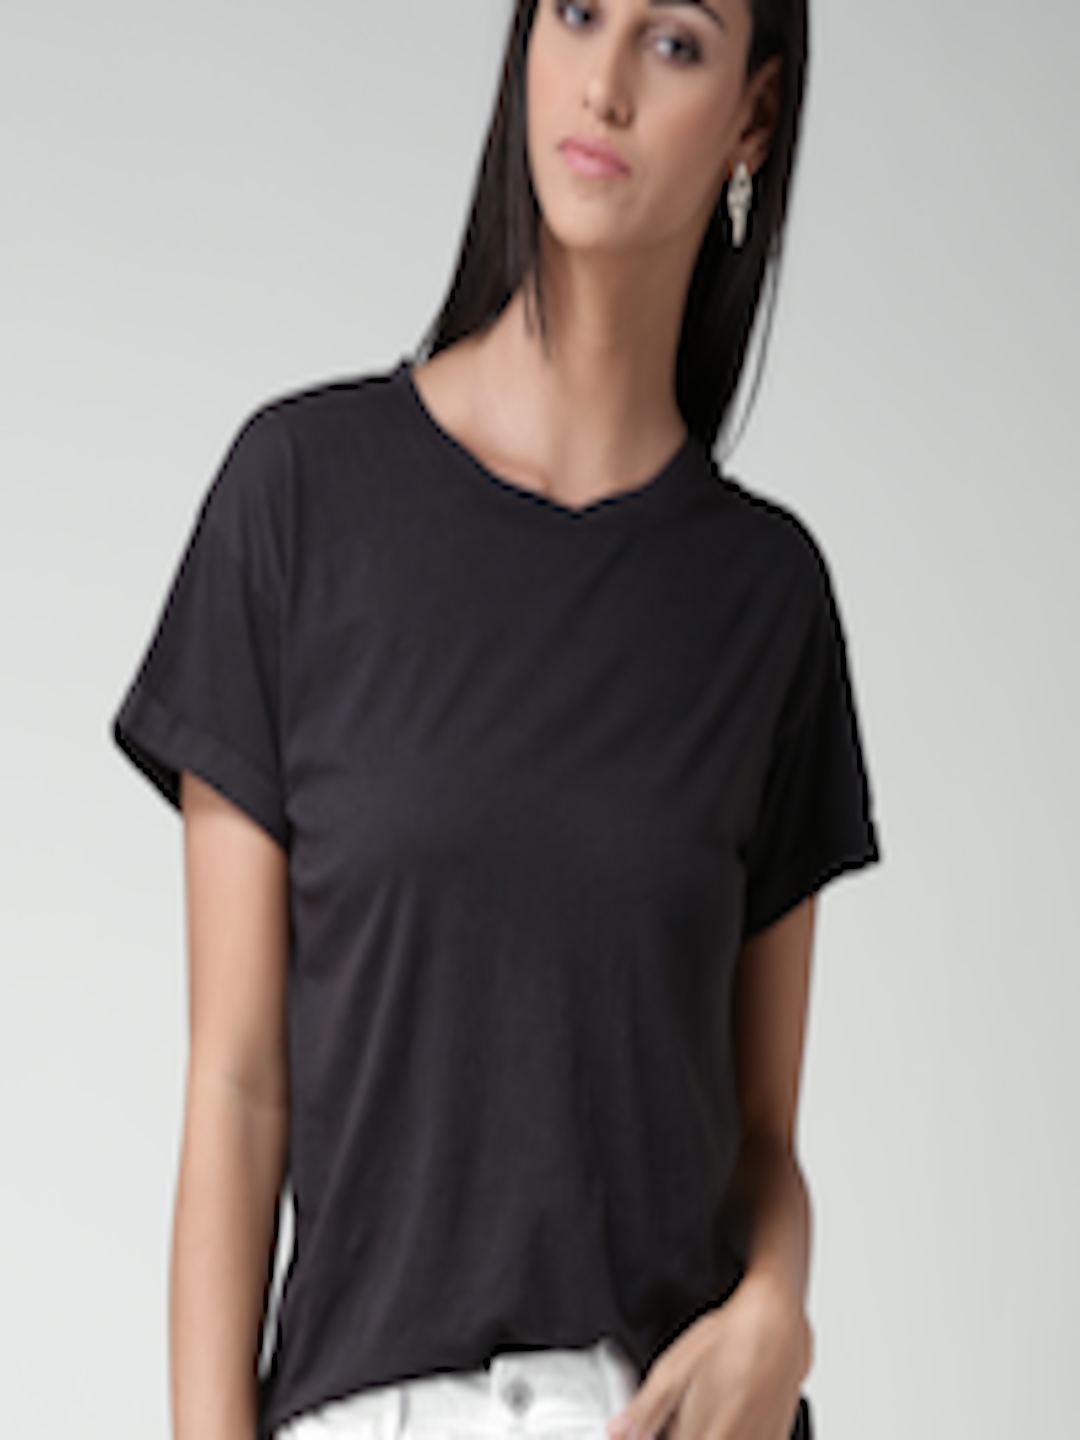 Buy FOREVER 21 Black Cut Out Back Top - Tops for Women 1322019 | Myntra